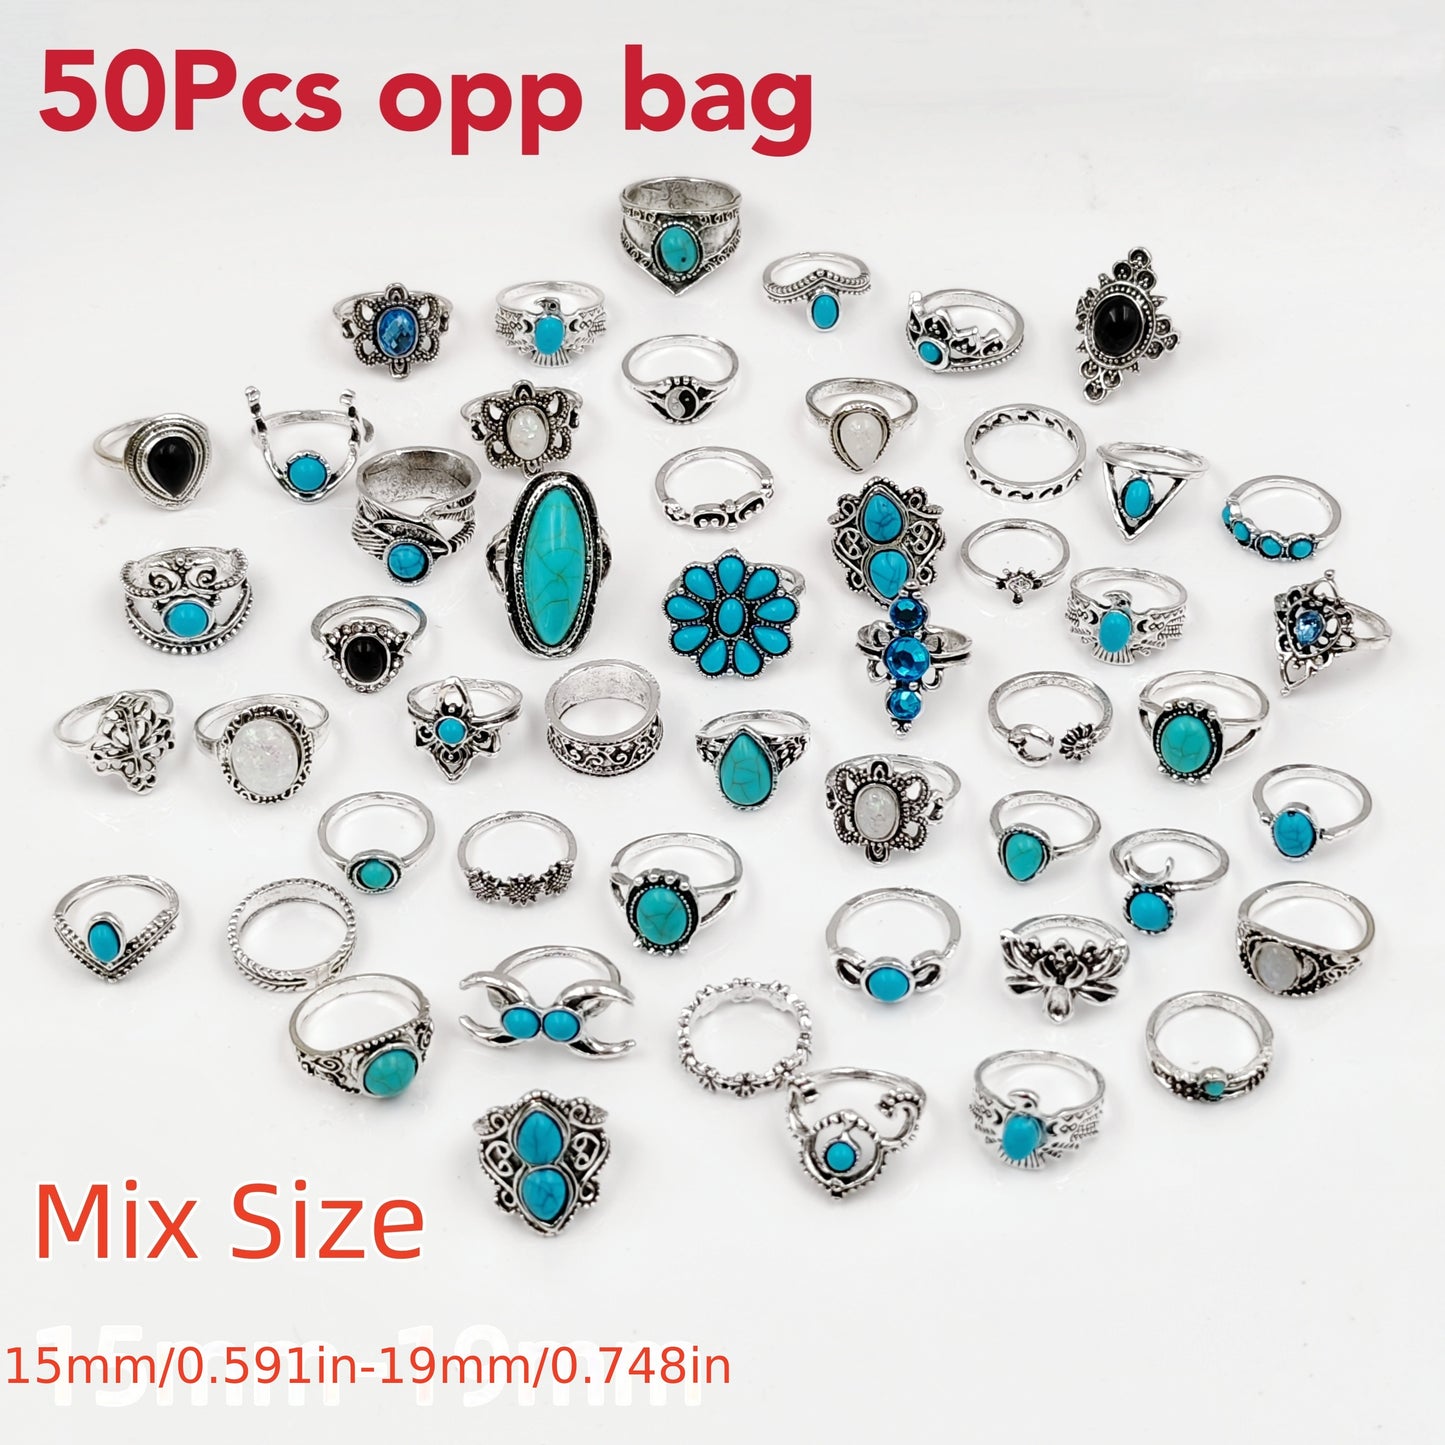 50pcs Boho Style Ring Set - Trendy Flower/Crown/Geometry Design Mix and Match